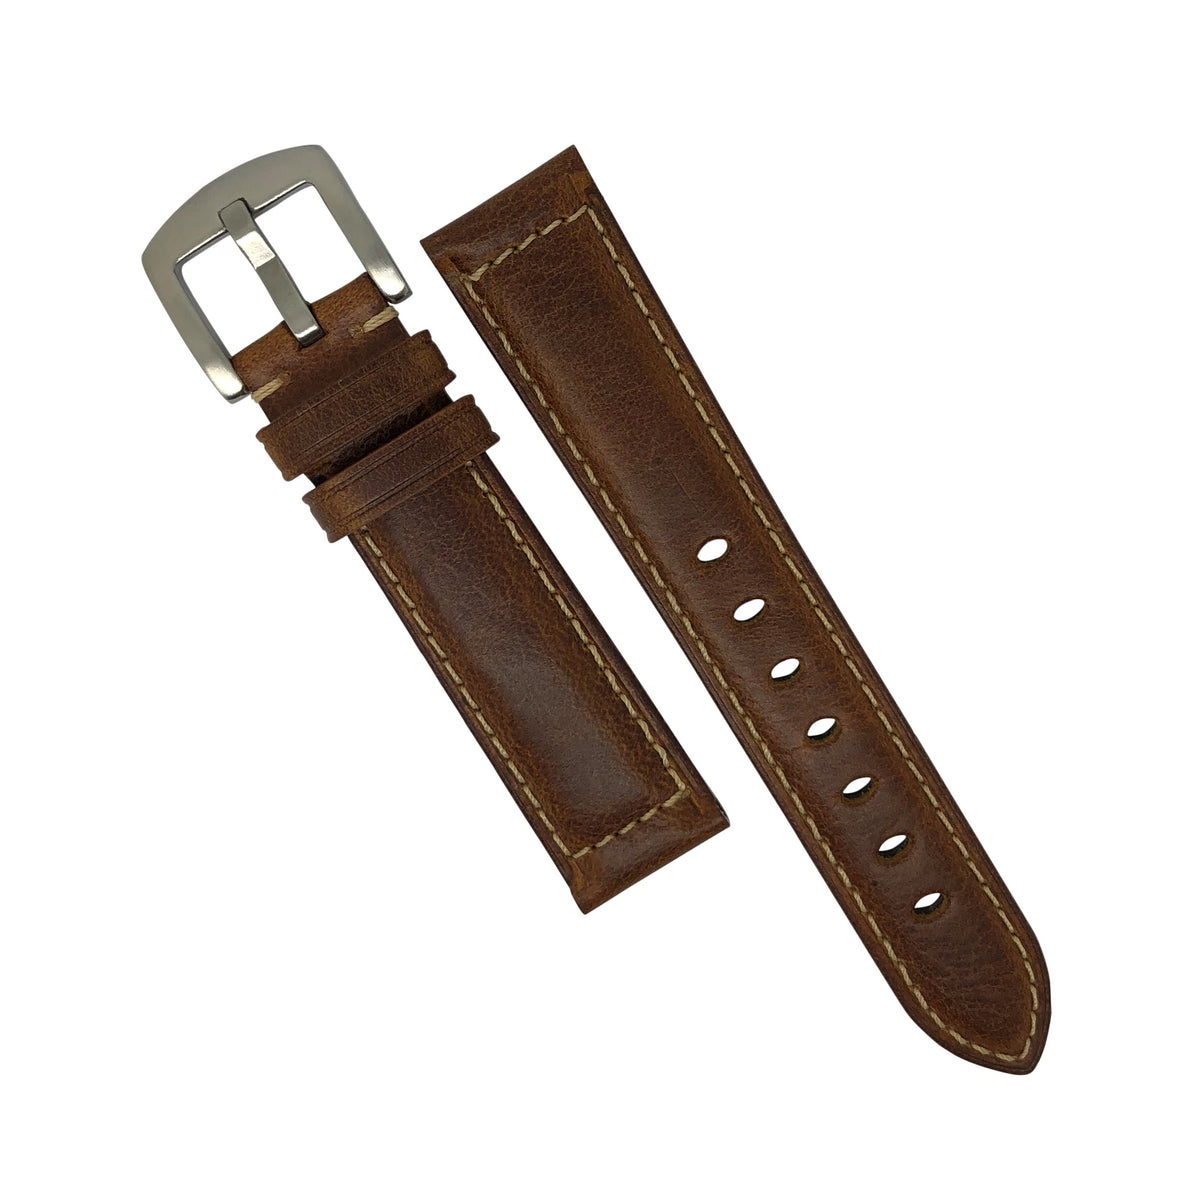 M2 Oil Waxed Leather Watch Strap in Tan (20mm) - Nomad watch Works